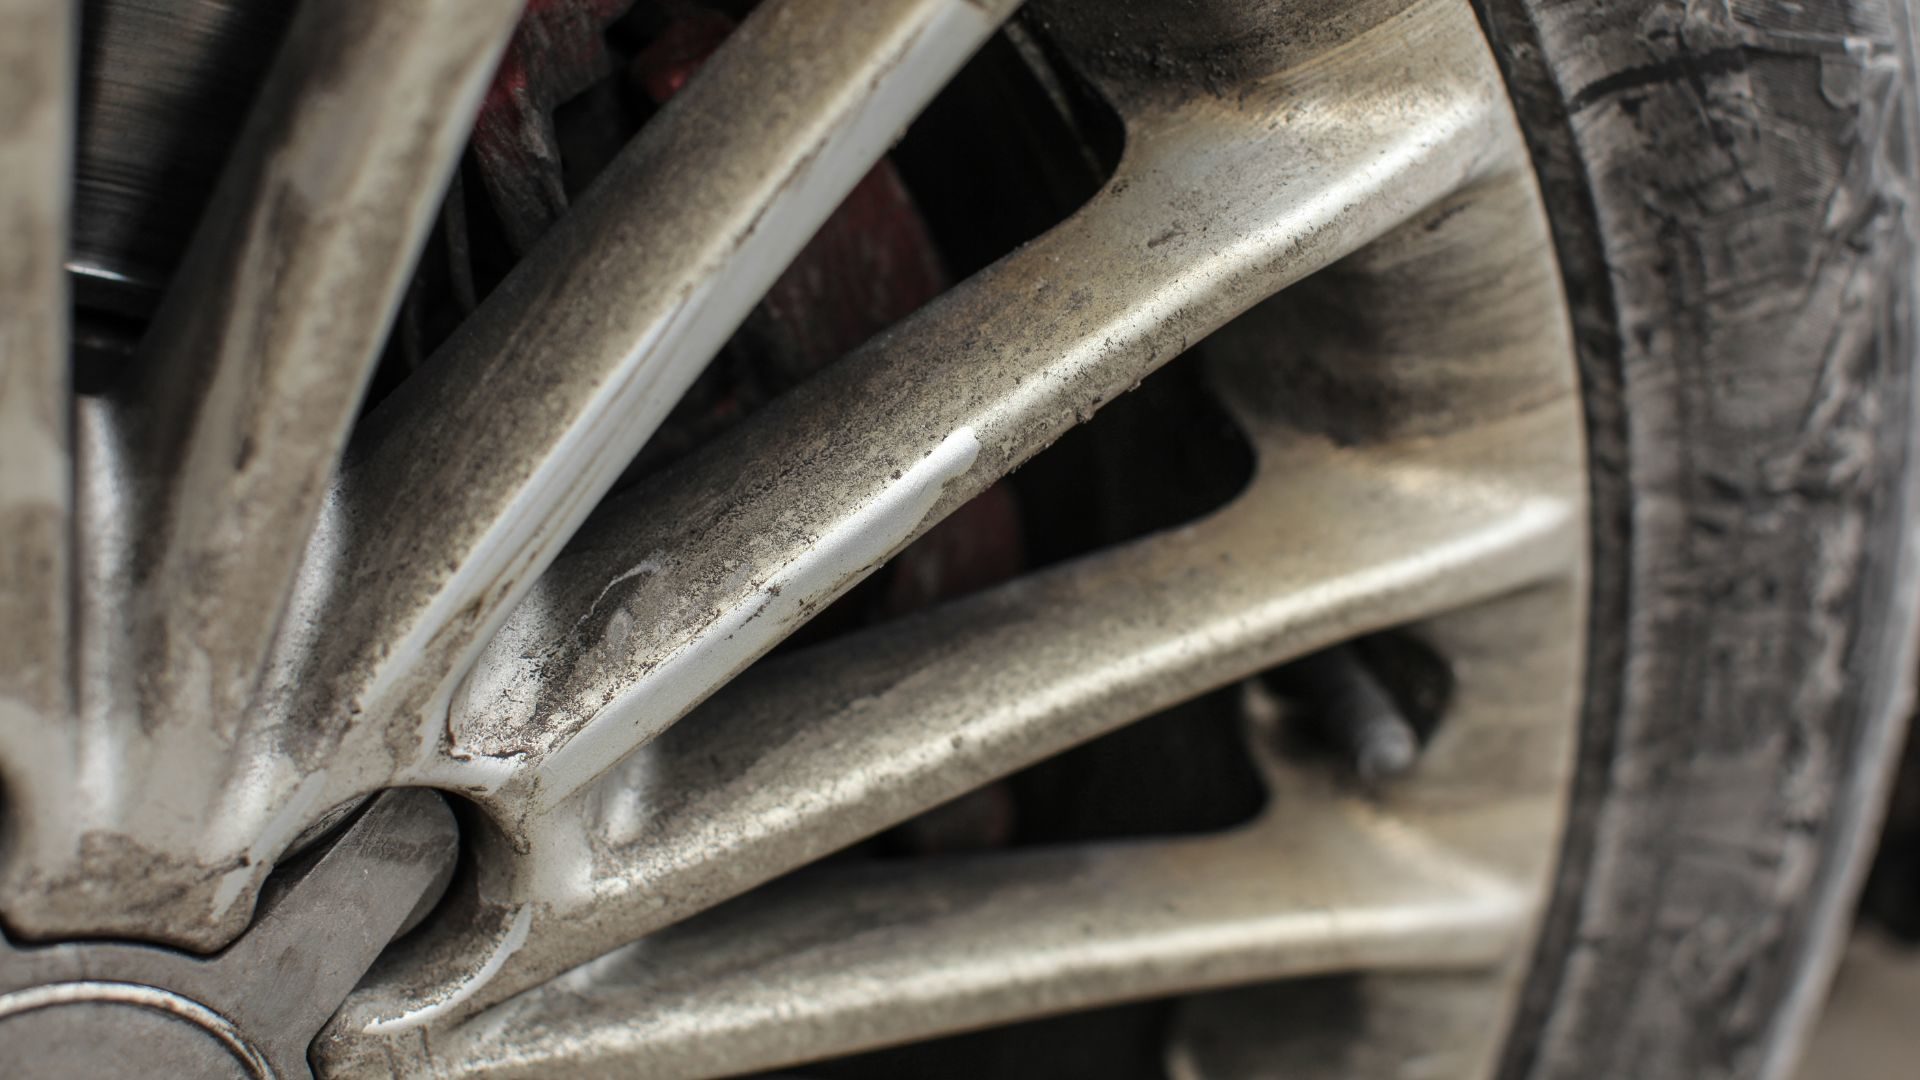 Brake wear impacts the environment, but there are technological trends to mitigate the problem